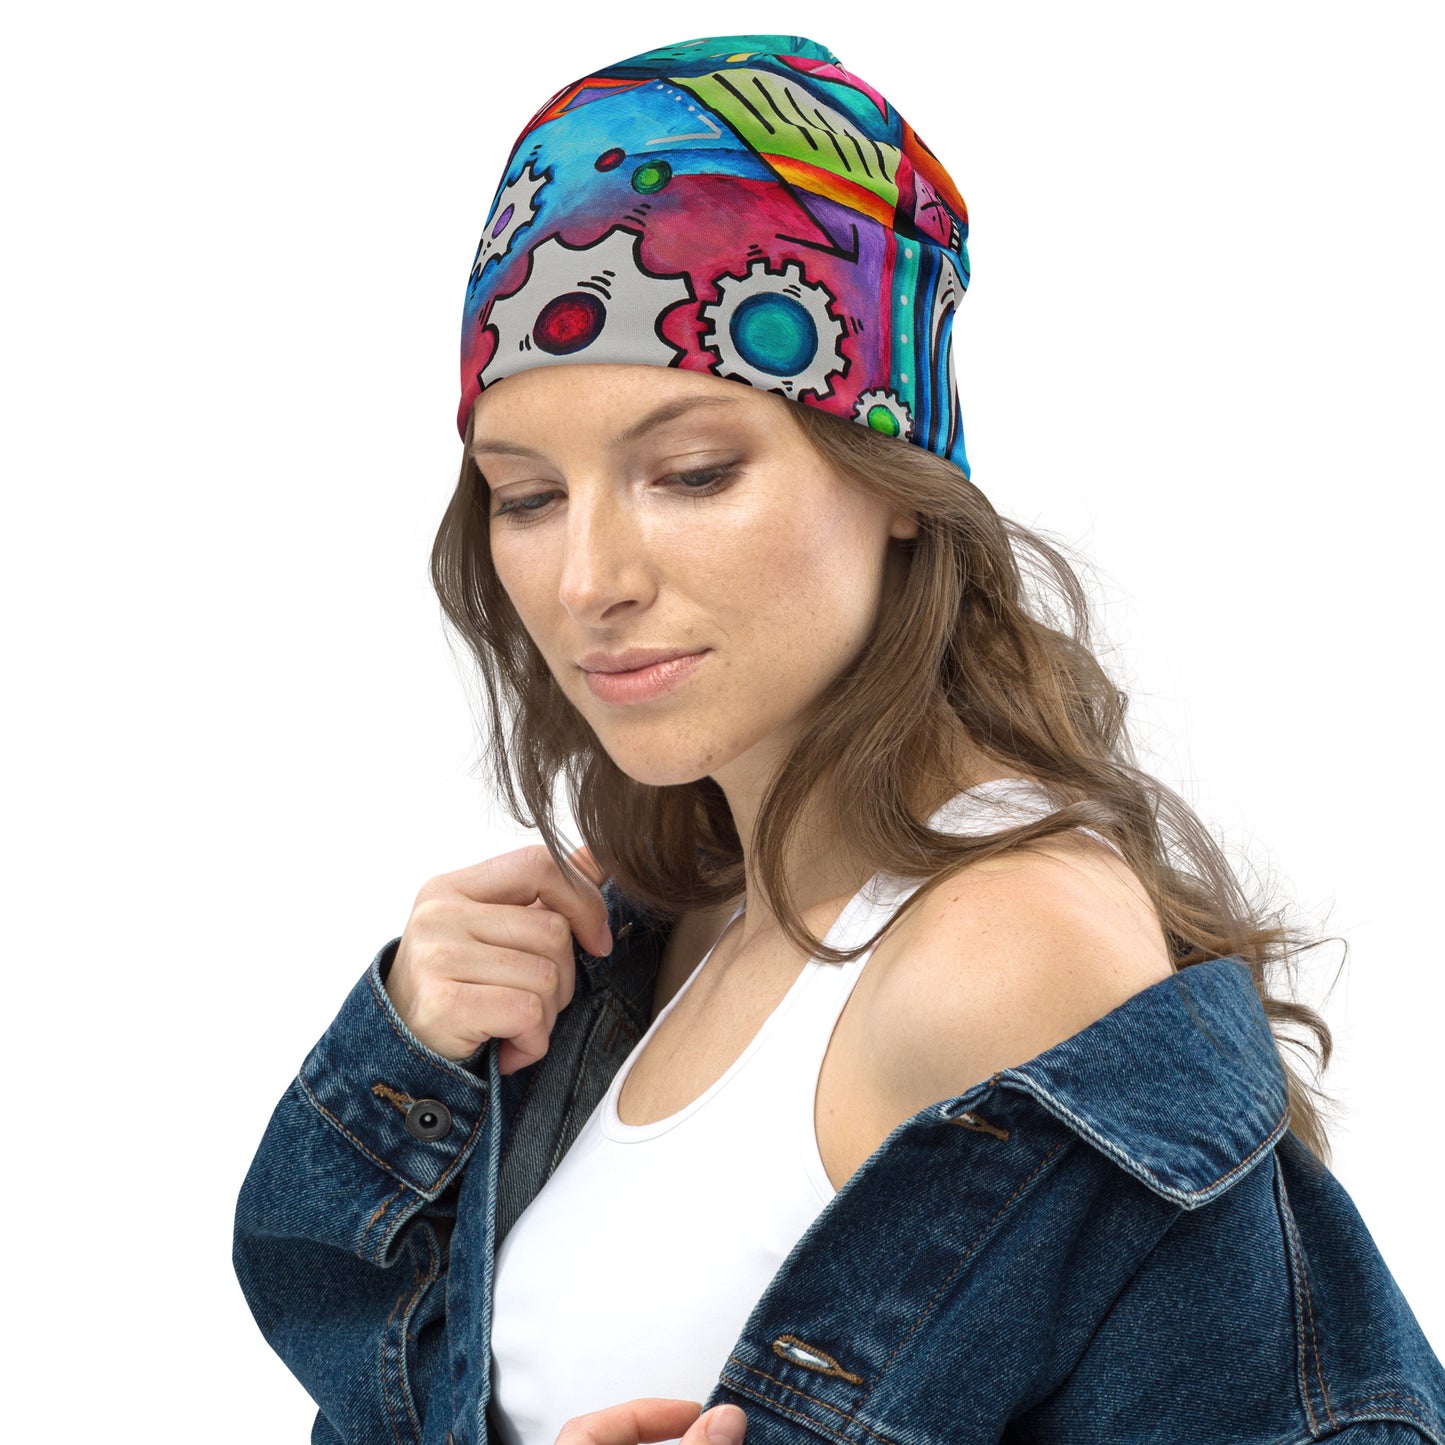 colorful and fun cycling biking beanie in bold pink purple rainbow colors. featuring gears and chains, perfect for the avid cycling enthusiasts for chilly rides, or to wear on a hike or anytime you would wear a beanie and want something fun and stylish! From the chic, modern cycling brand AROON